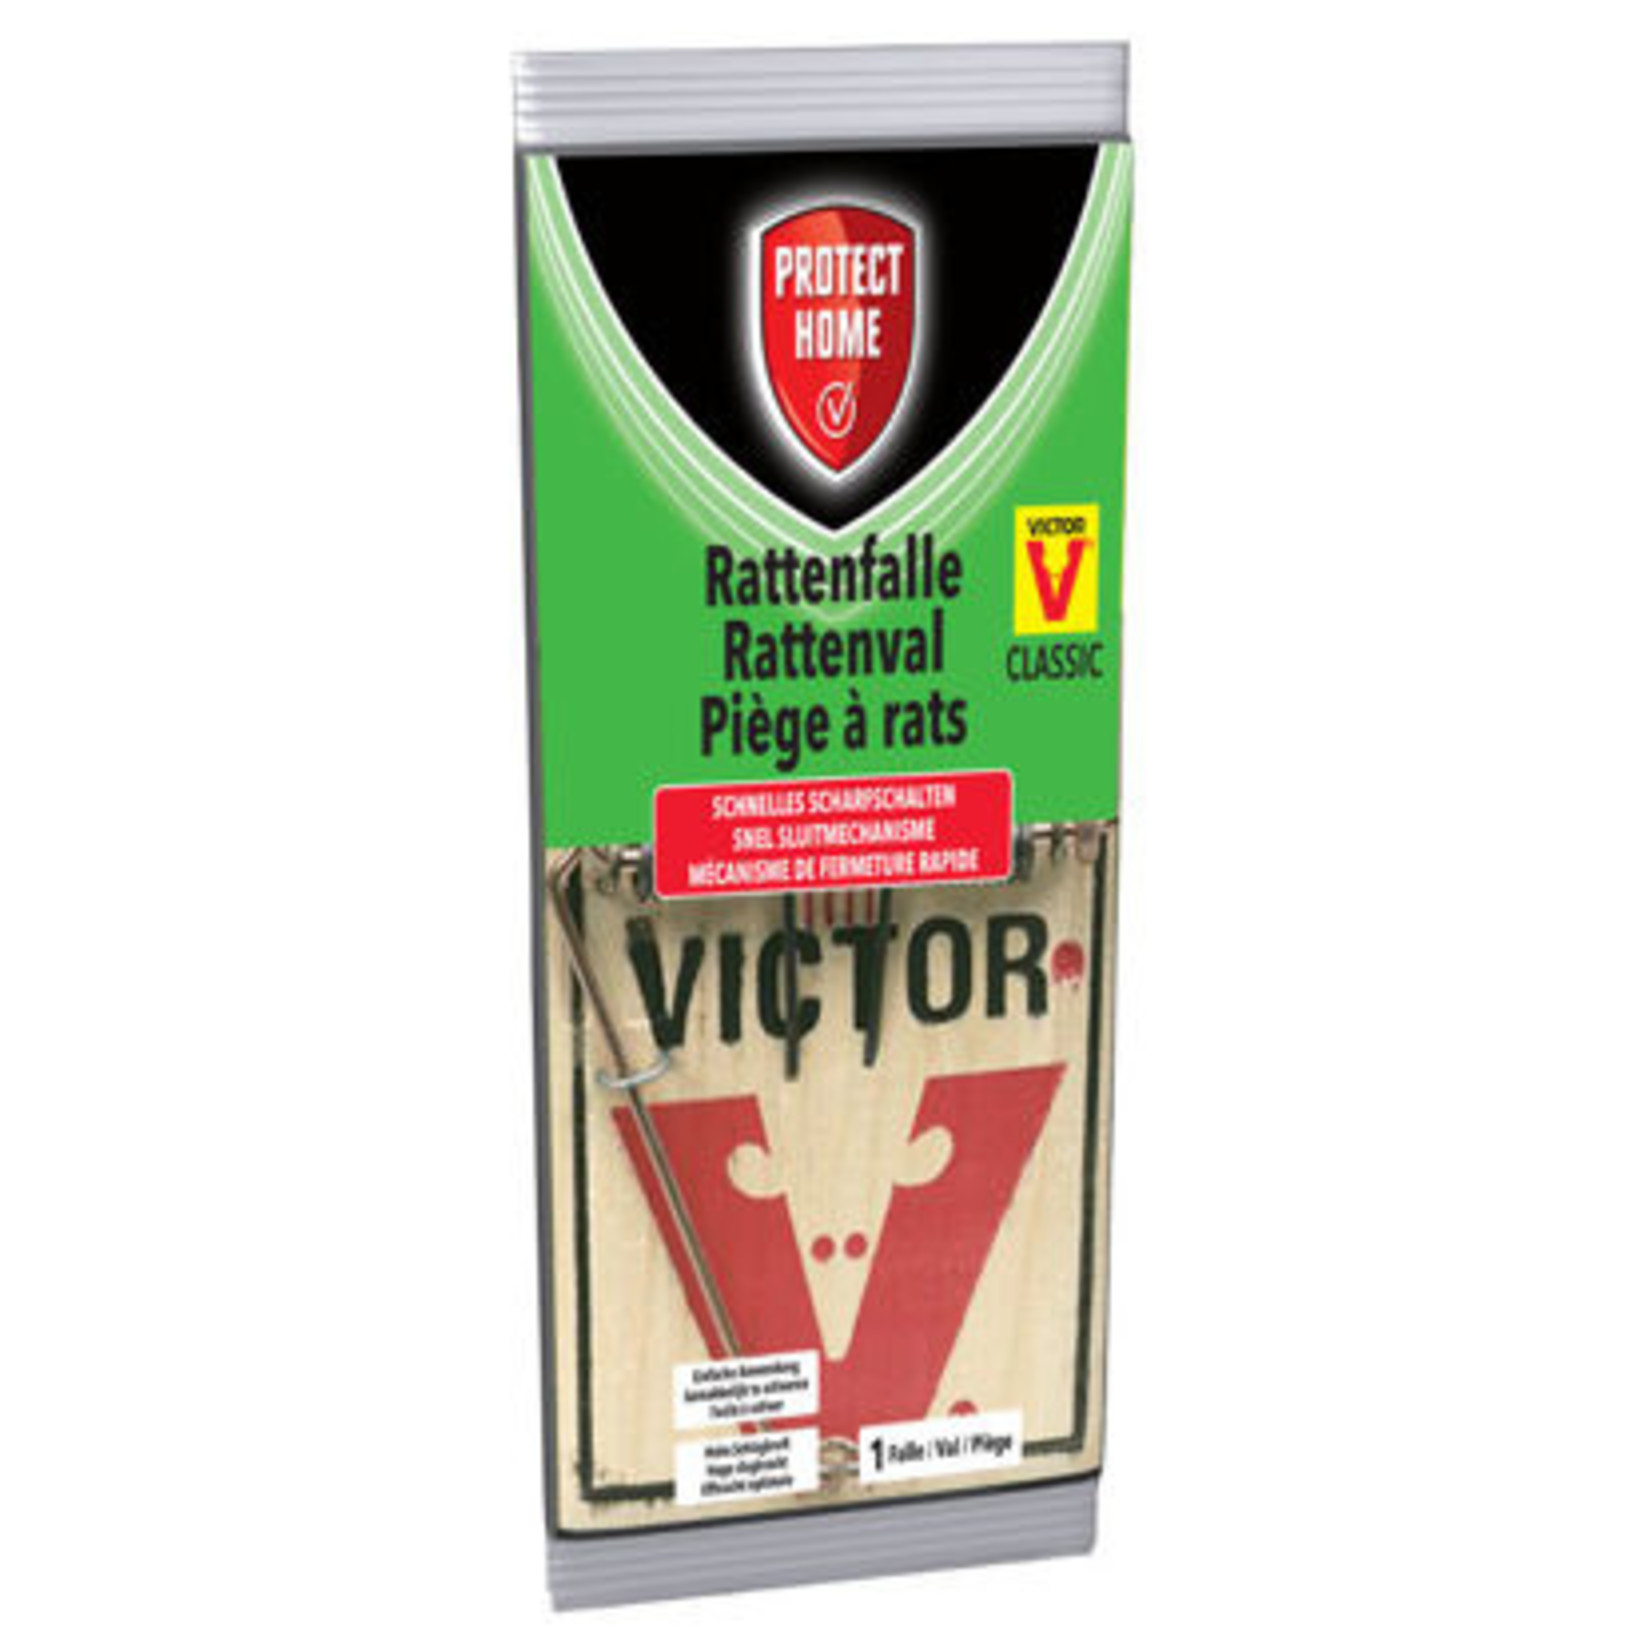 Rattenval hout -Protect Home-